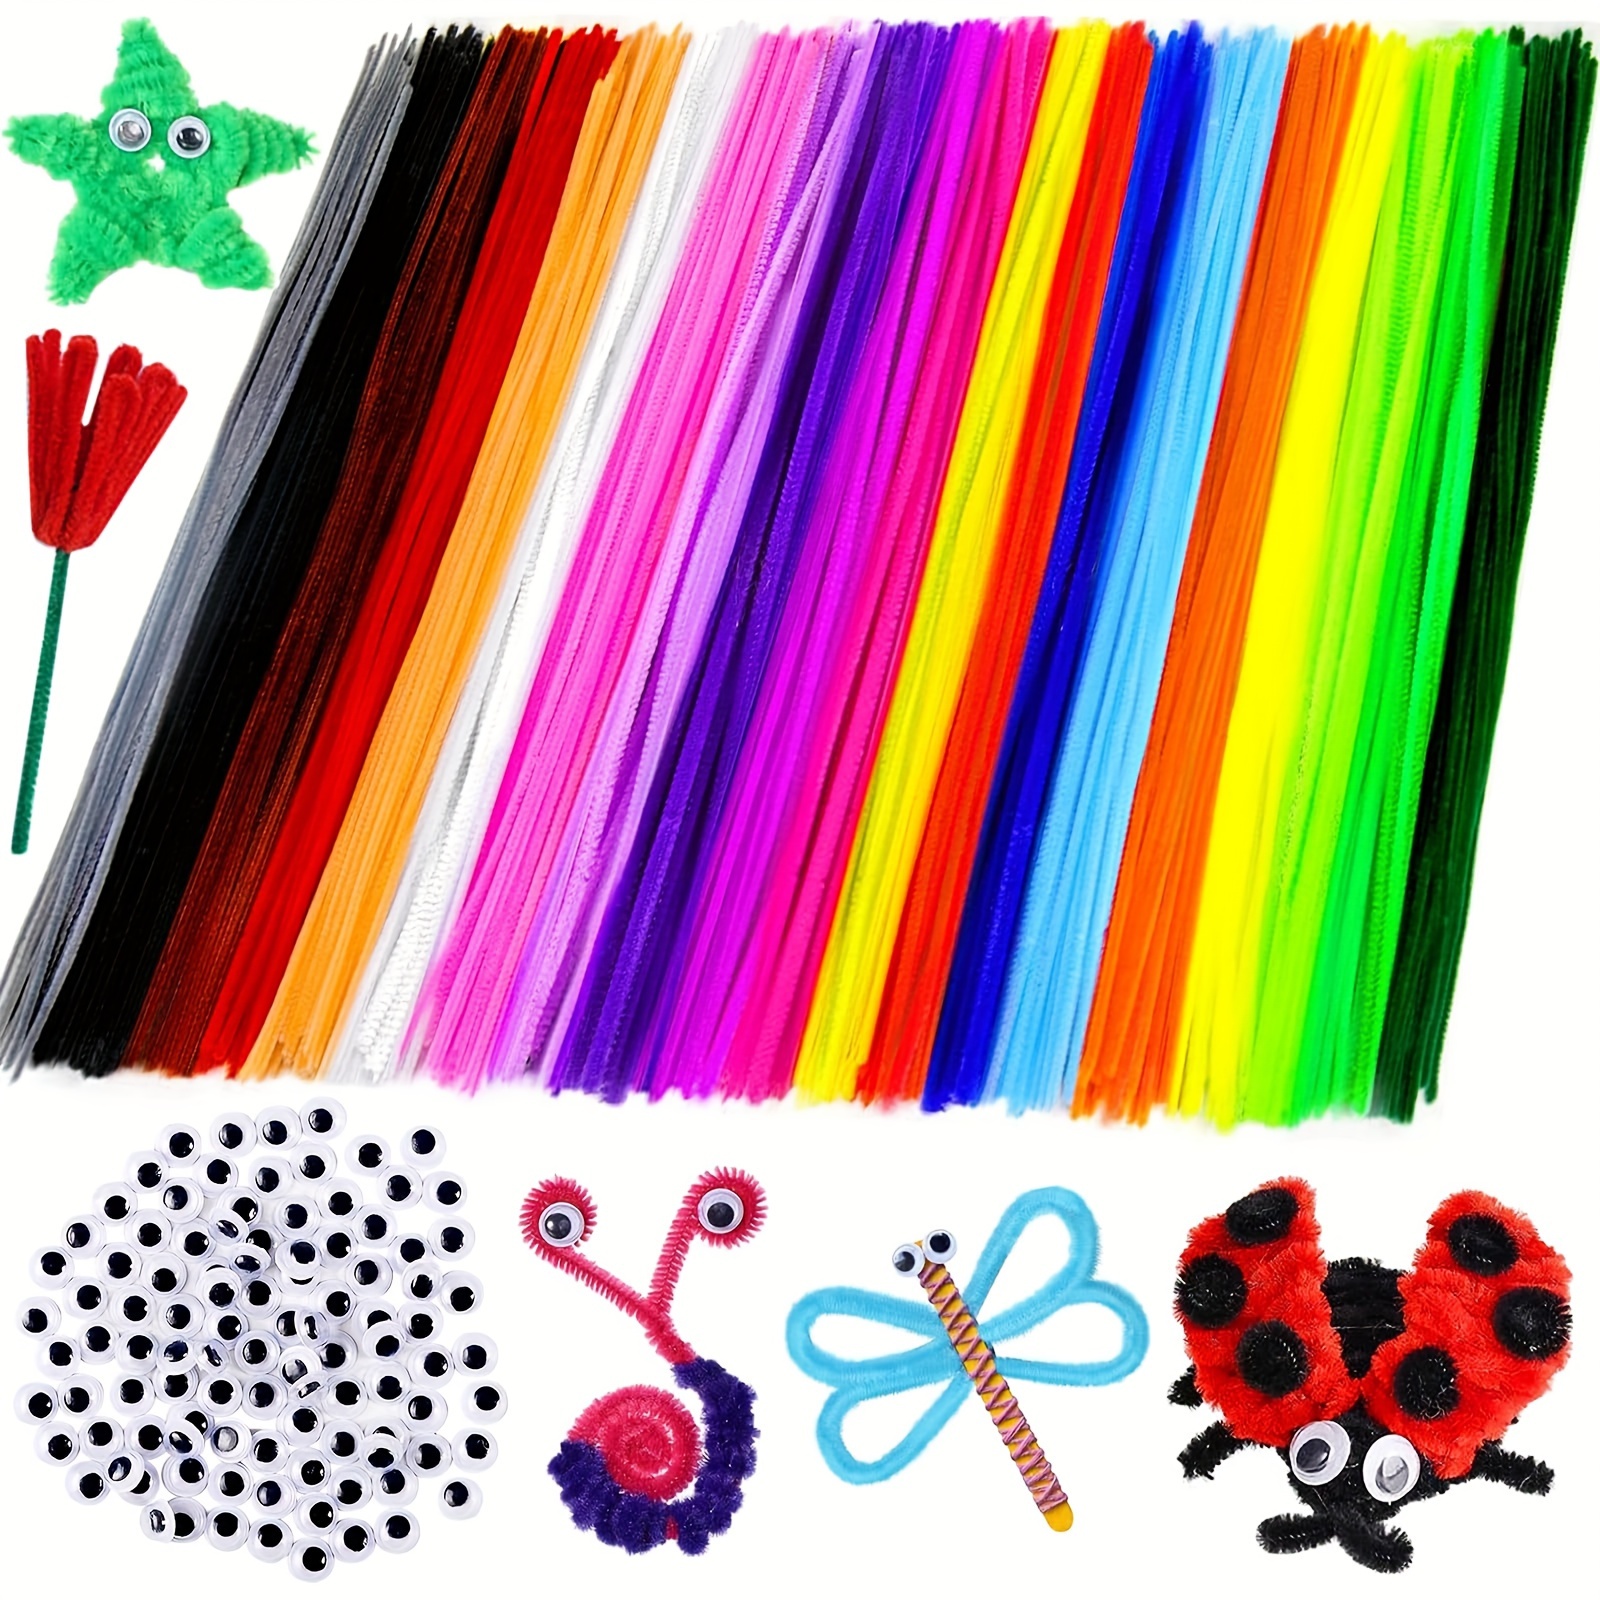 

150pcs Vibrant Mixed Color Twist Sticks & Self-adhesive Wiggle Eyes Set - Perfect For Diy Crafts, Art Projects | Chenille Stems Included